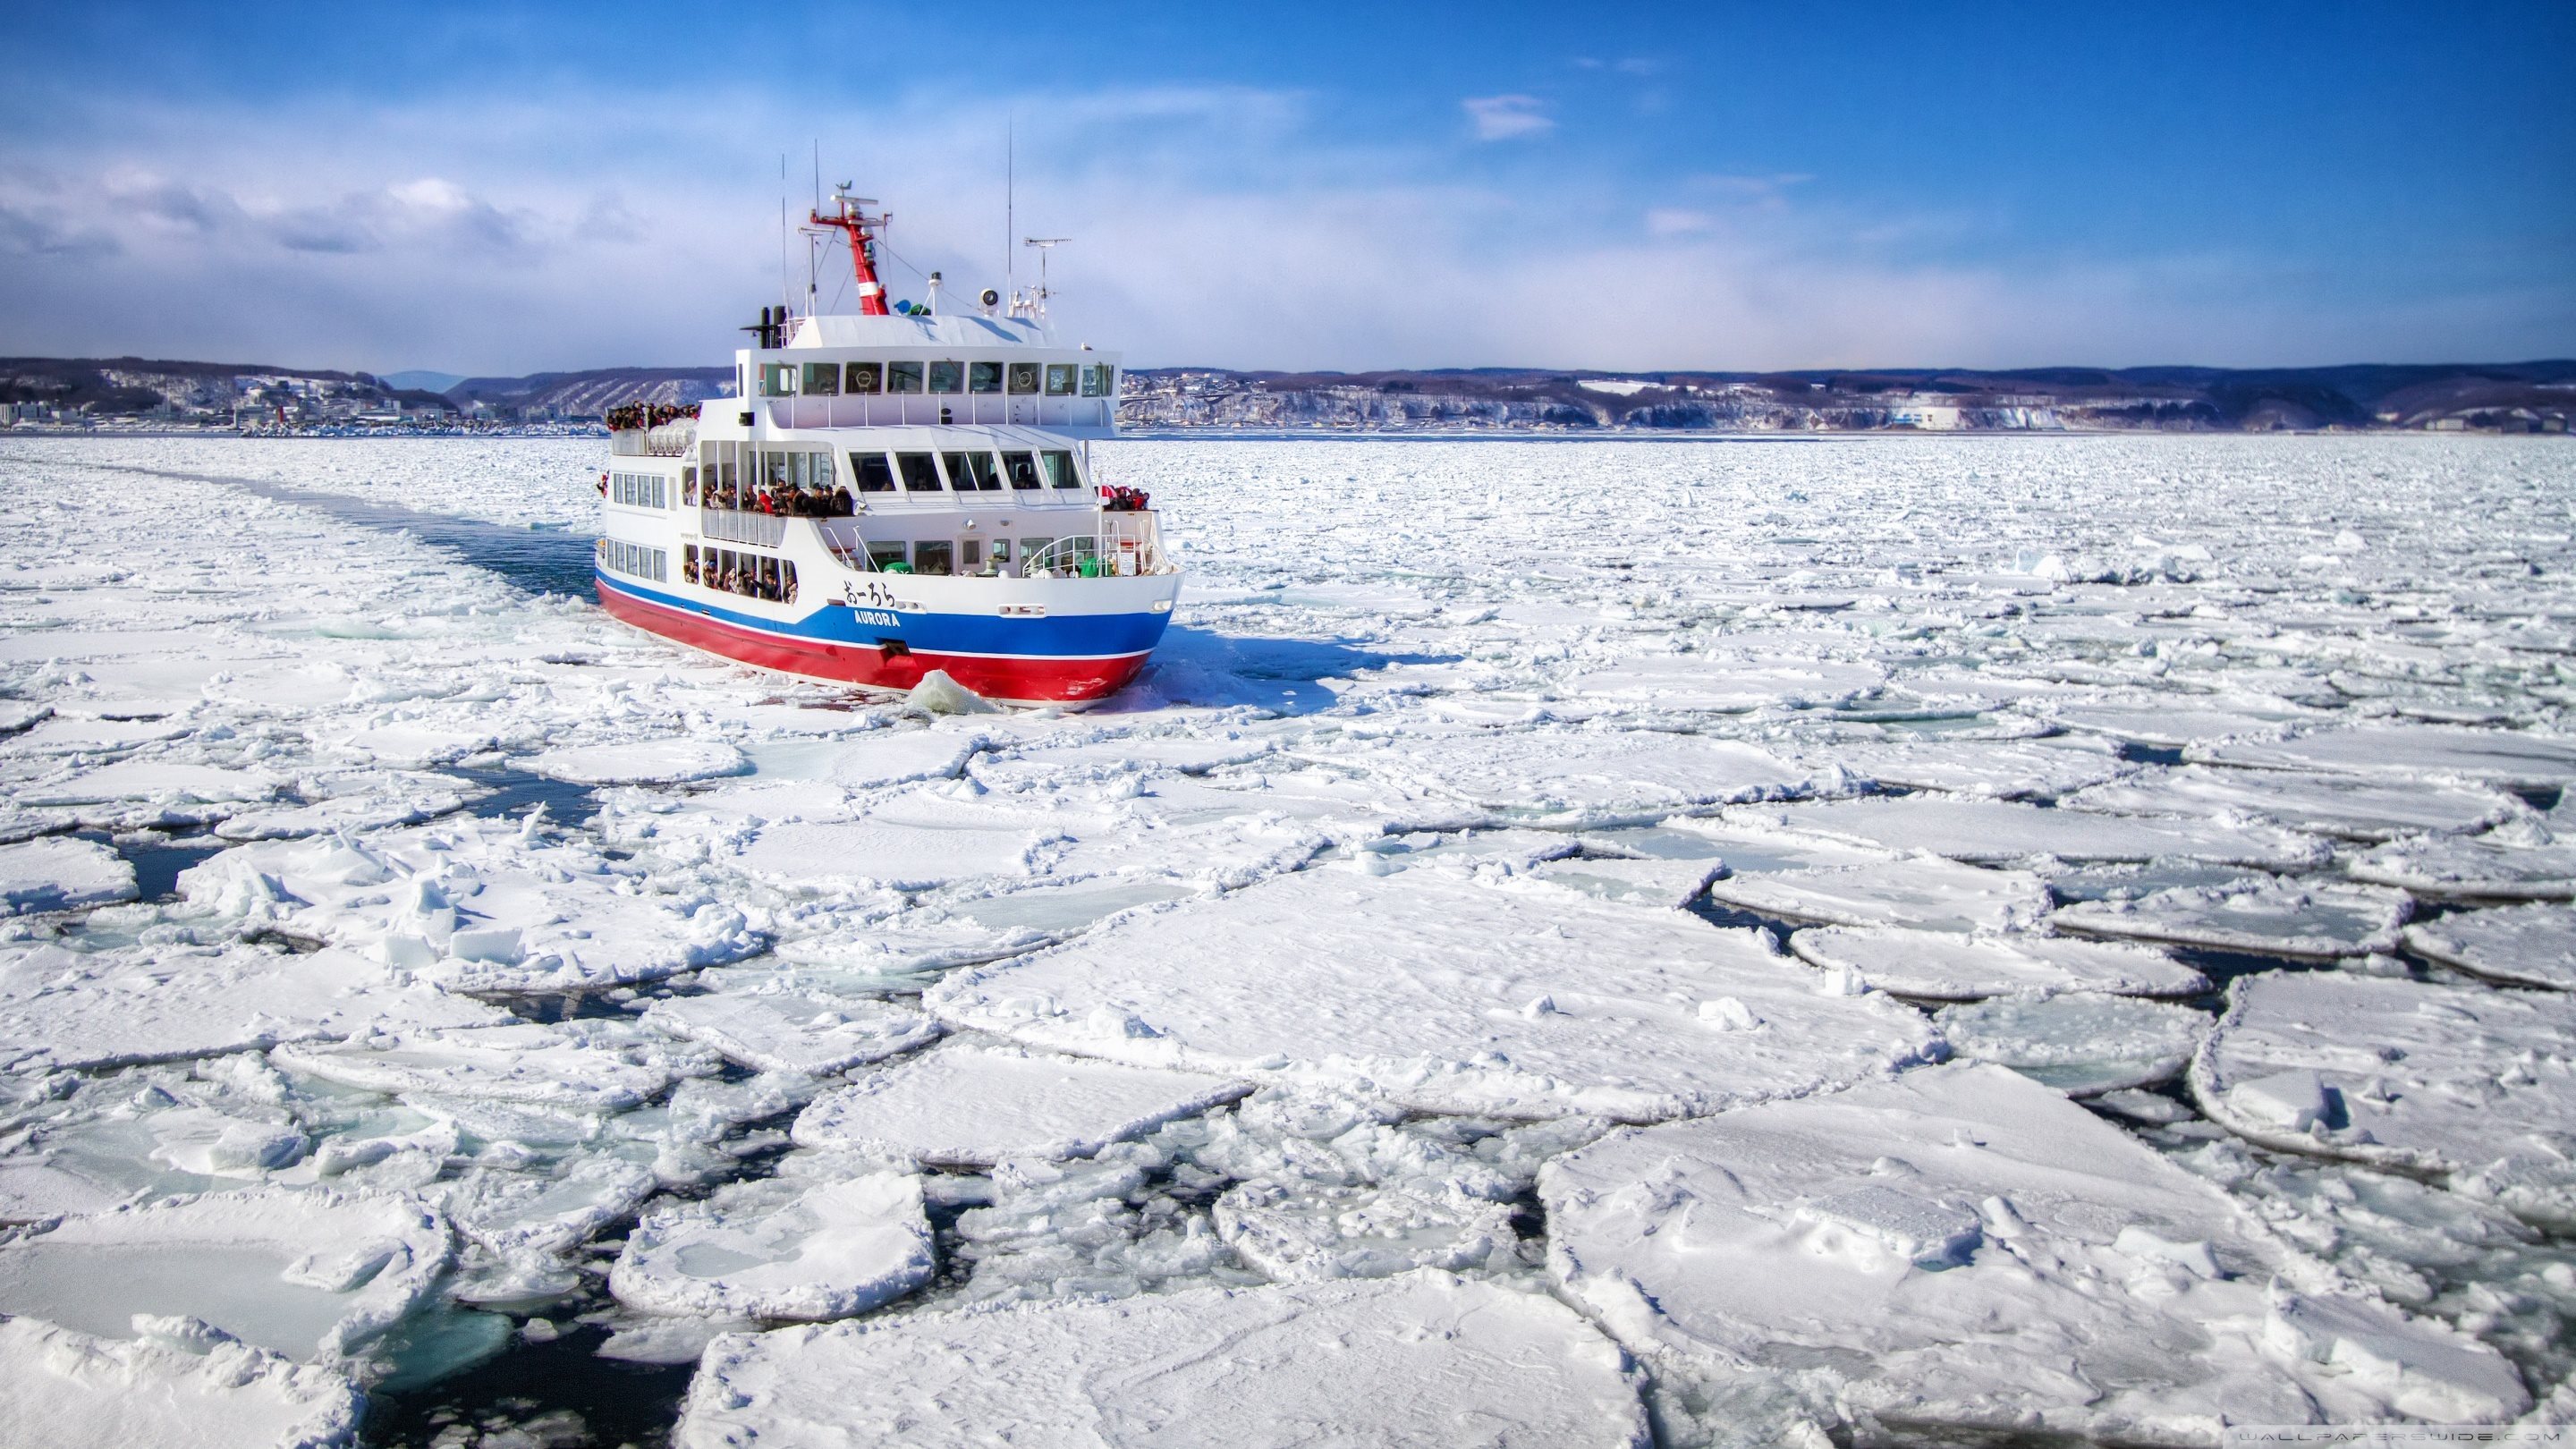 Download wallpapers breaking, the ship, aurora, tourism, ice, forvater ...